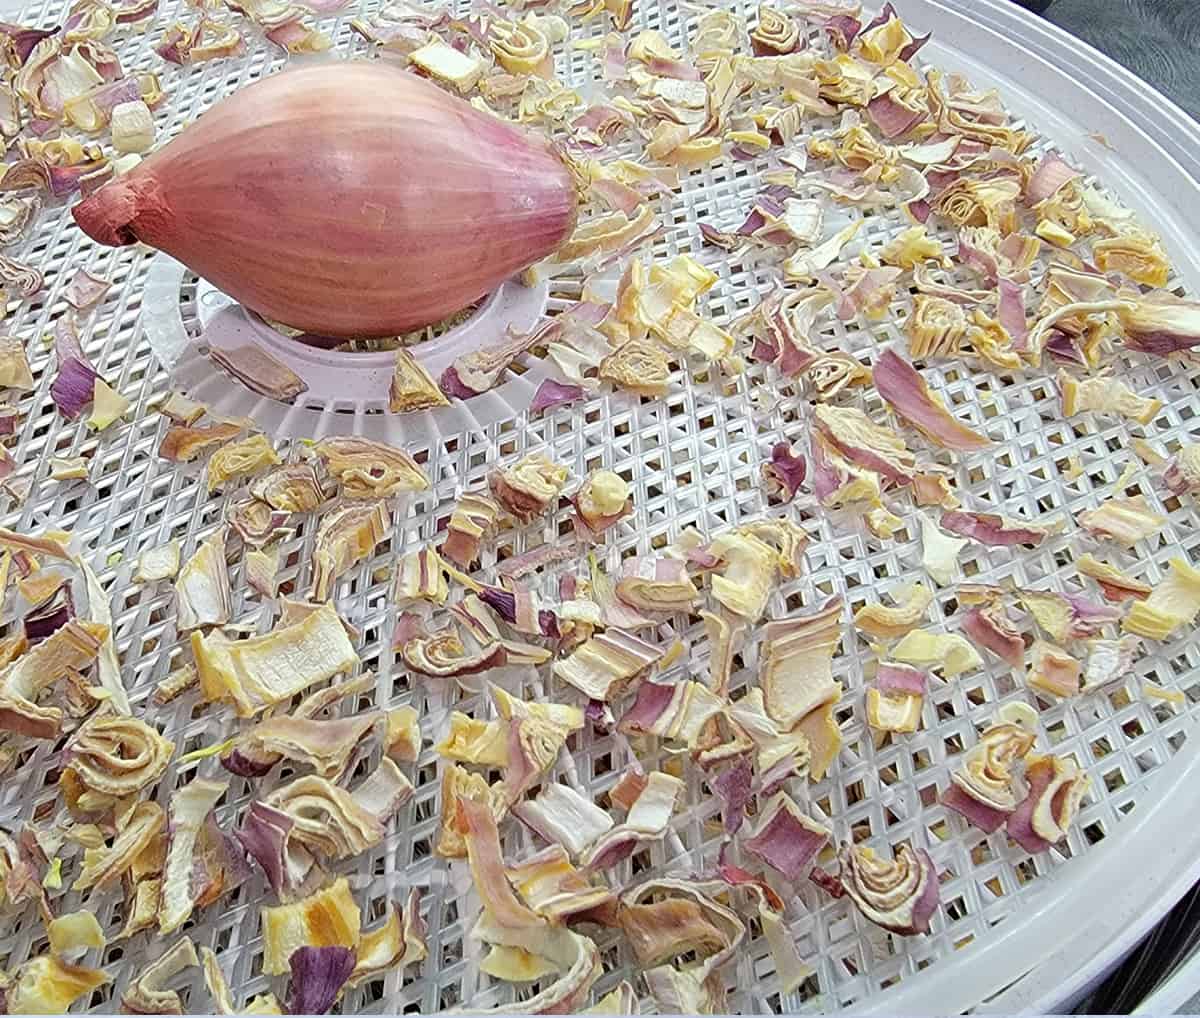 Nesco dehydrator tray full of dehydrated shallot pieces and a fresh shallot on top.